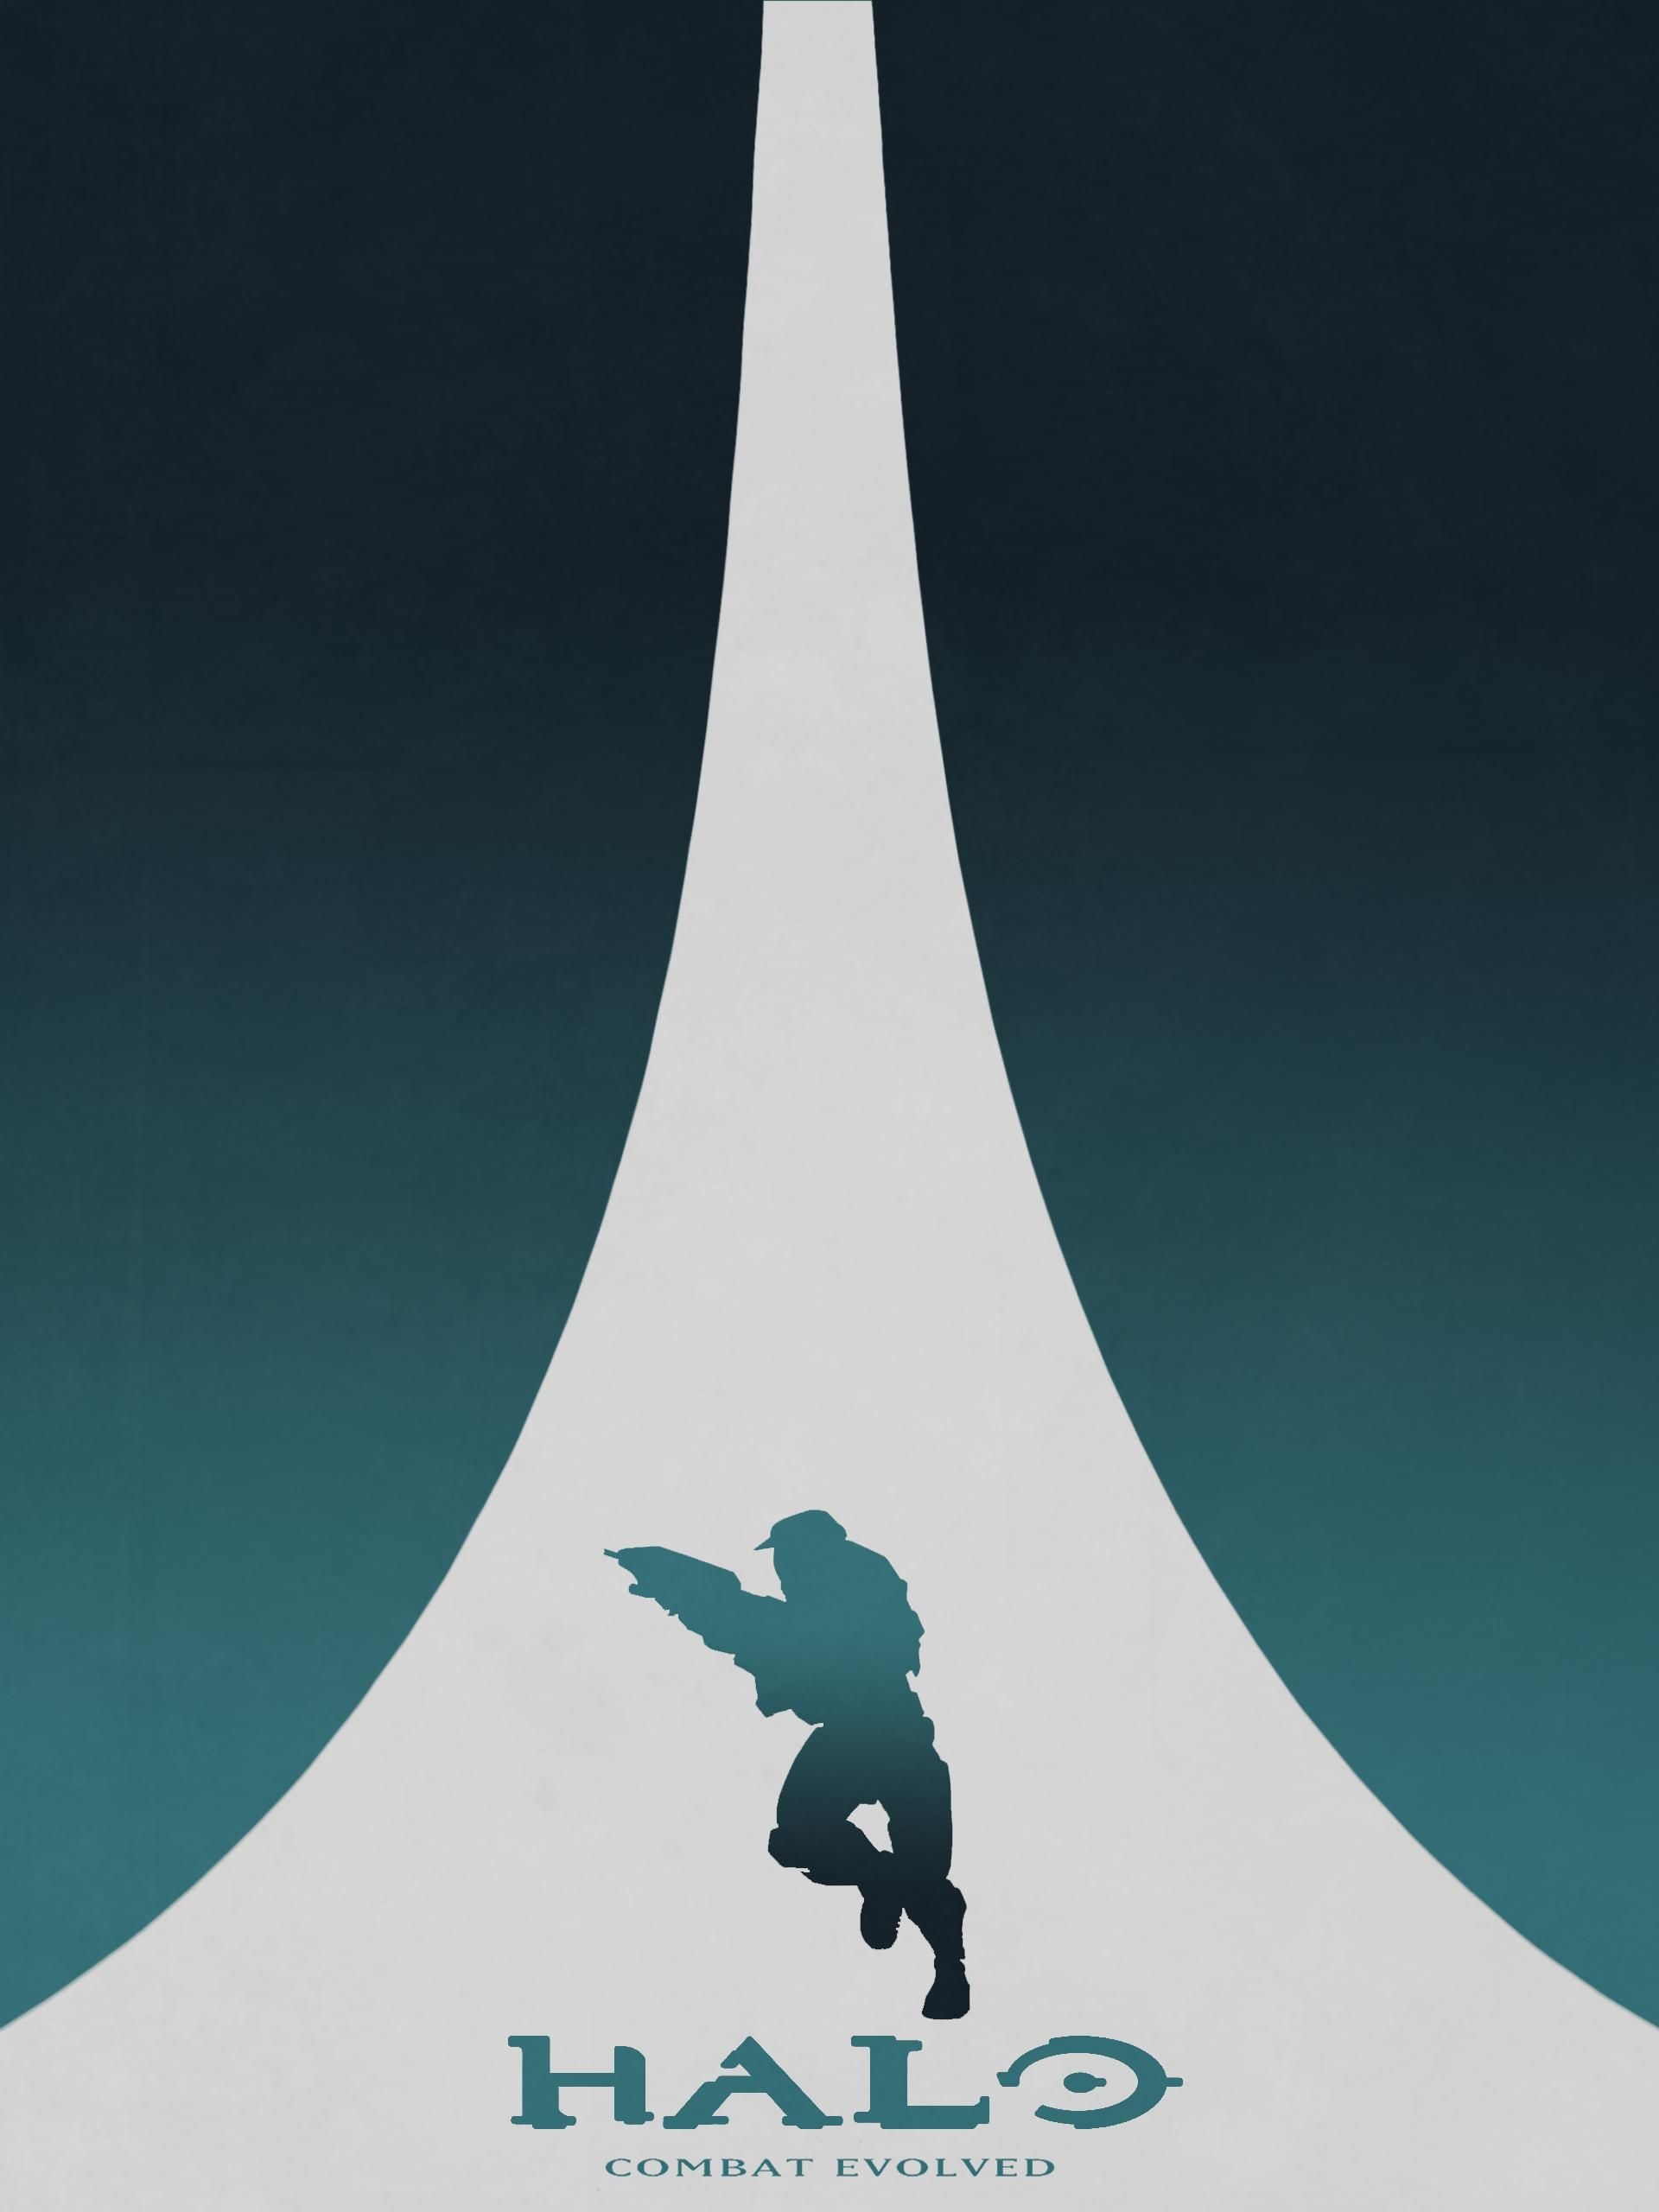 Minimalist Halo wallpapers, selection, Top-rated backgrounds, Clean and simple designs, 1920x2560 HD Phone